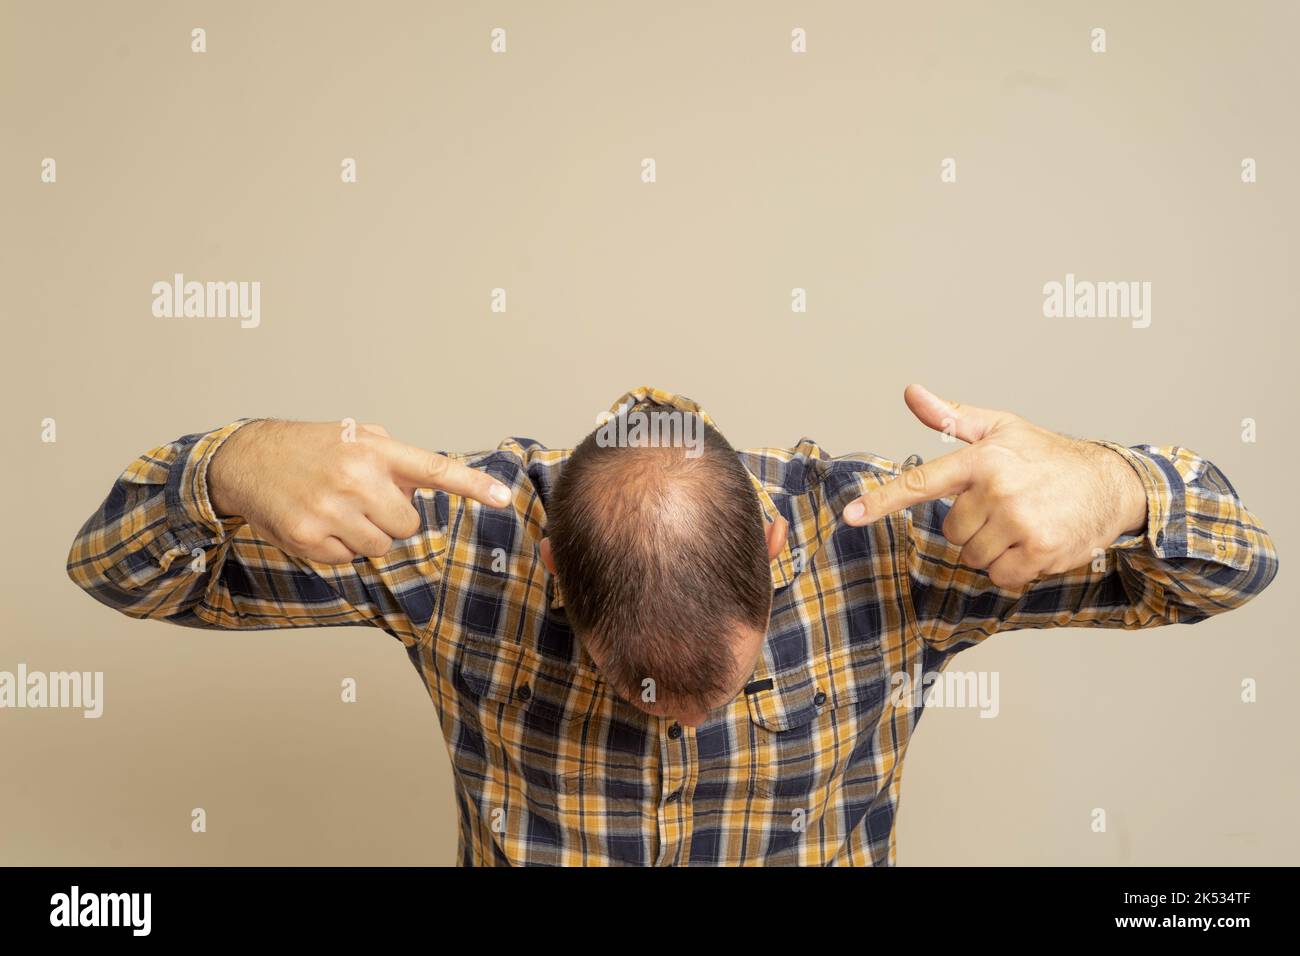 Man pointing at his incipient alopecia with both hands, wears a checked shirt isolated on beige background. Stock Photo